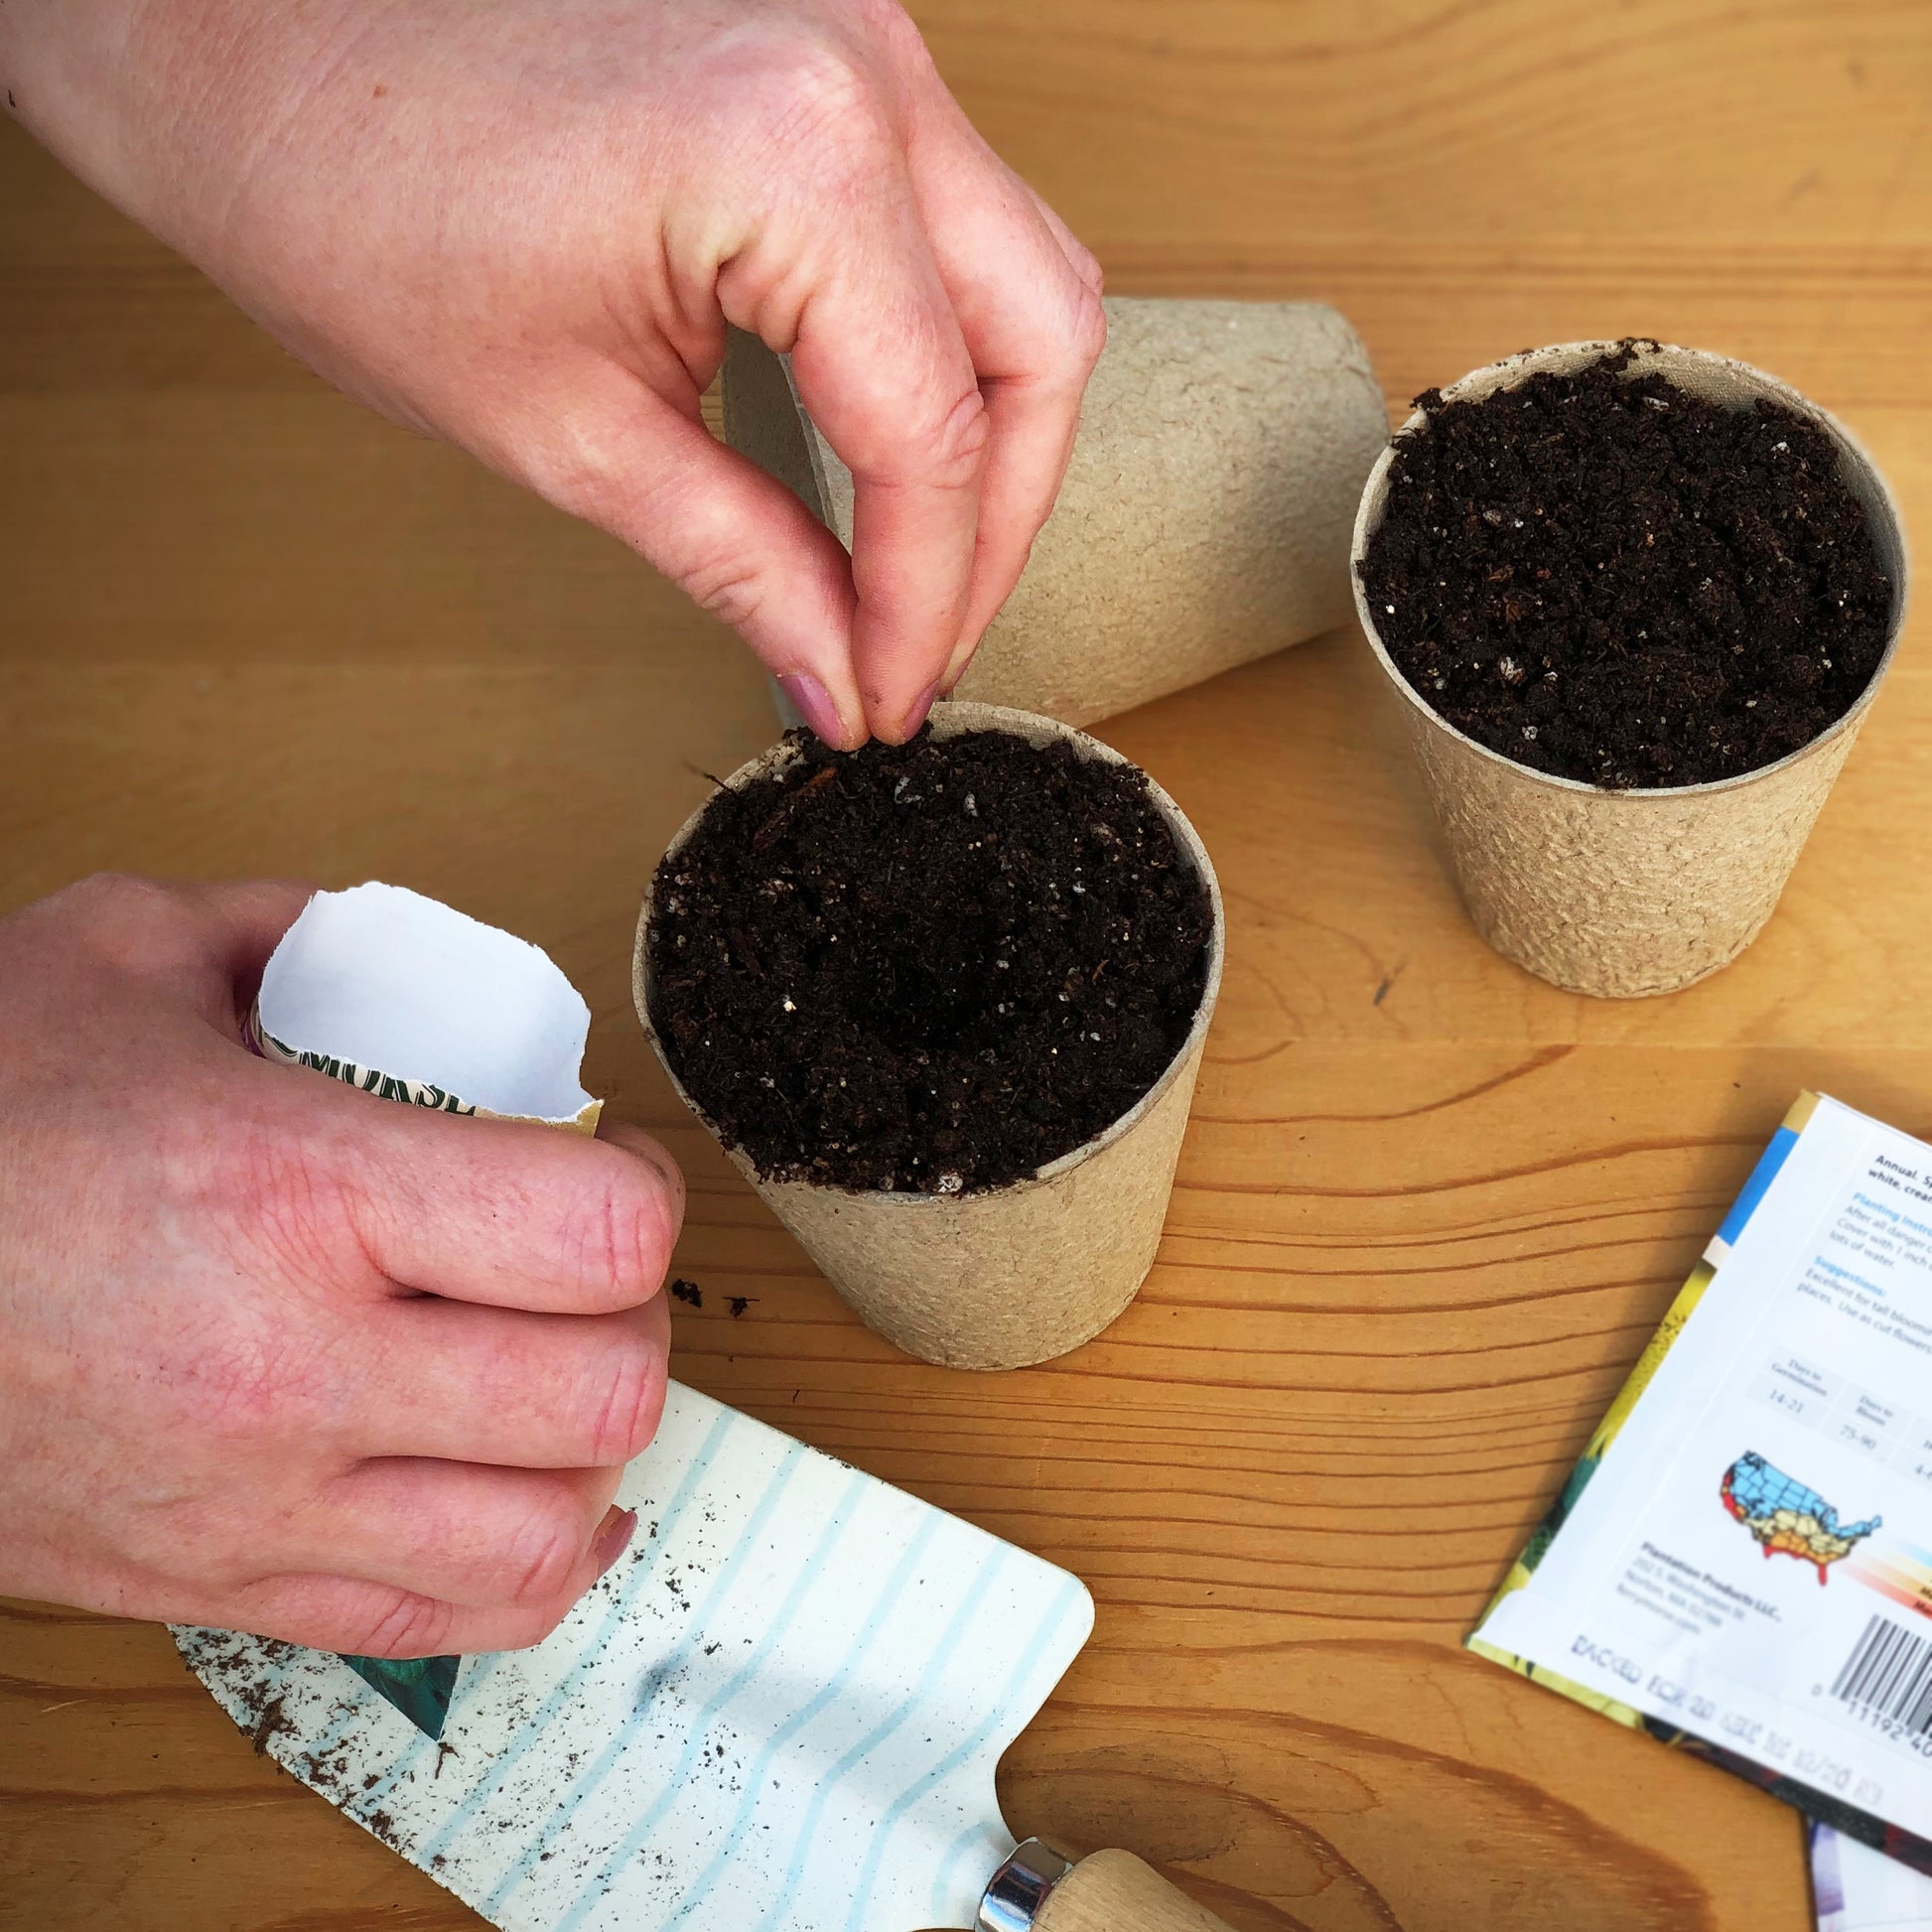 Start your Organic Big Max Pumpkin seeds in biodegradable peat or paper pots for easy transplanting.